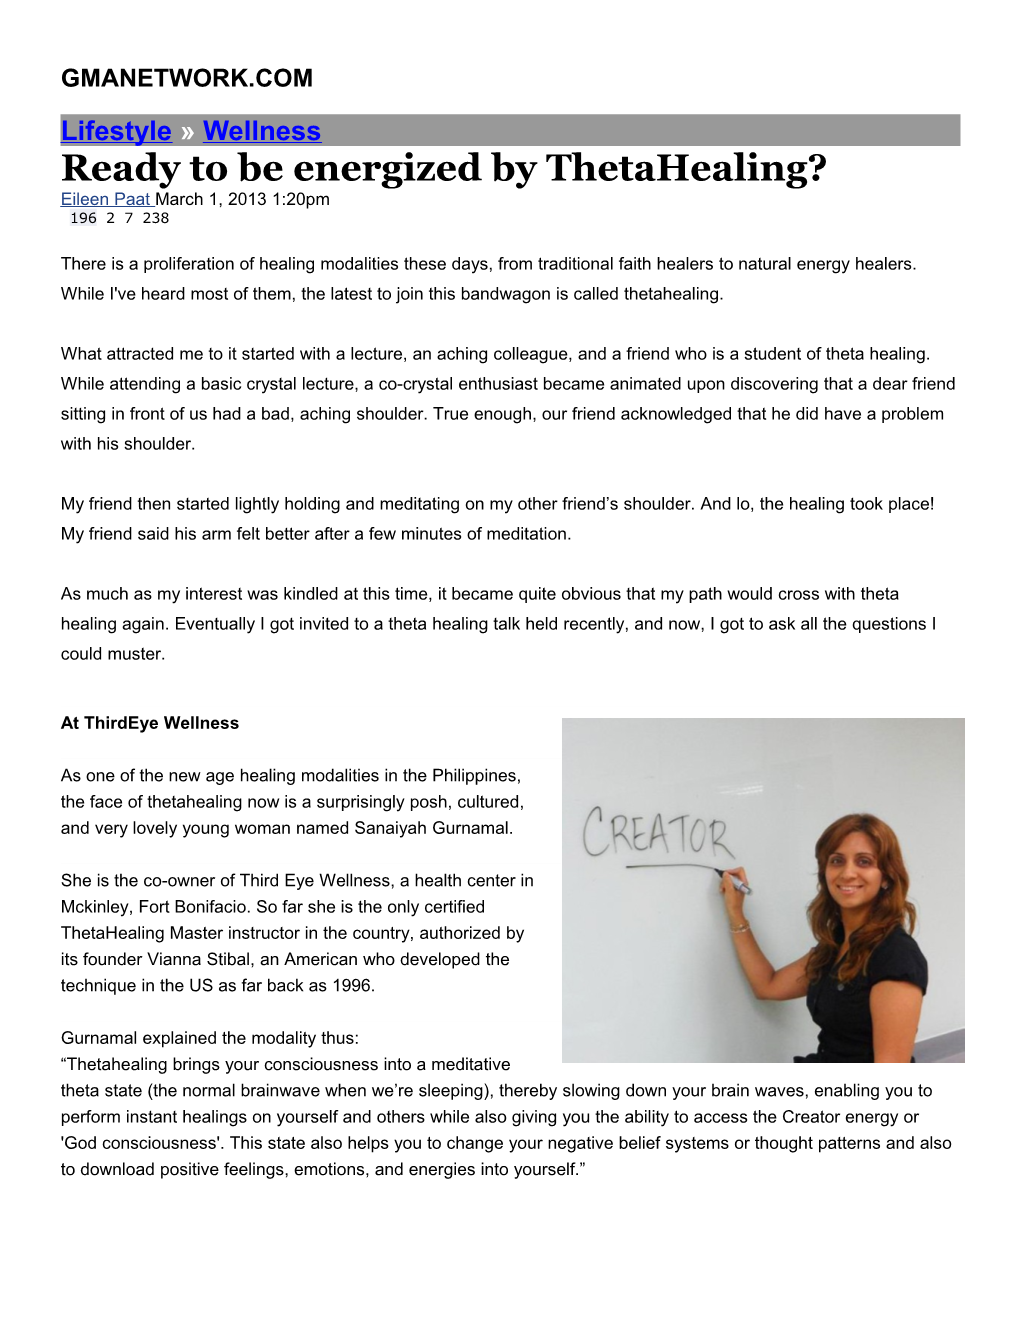 Ready to Be Energized by Thetahealing?